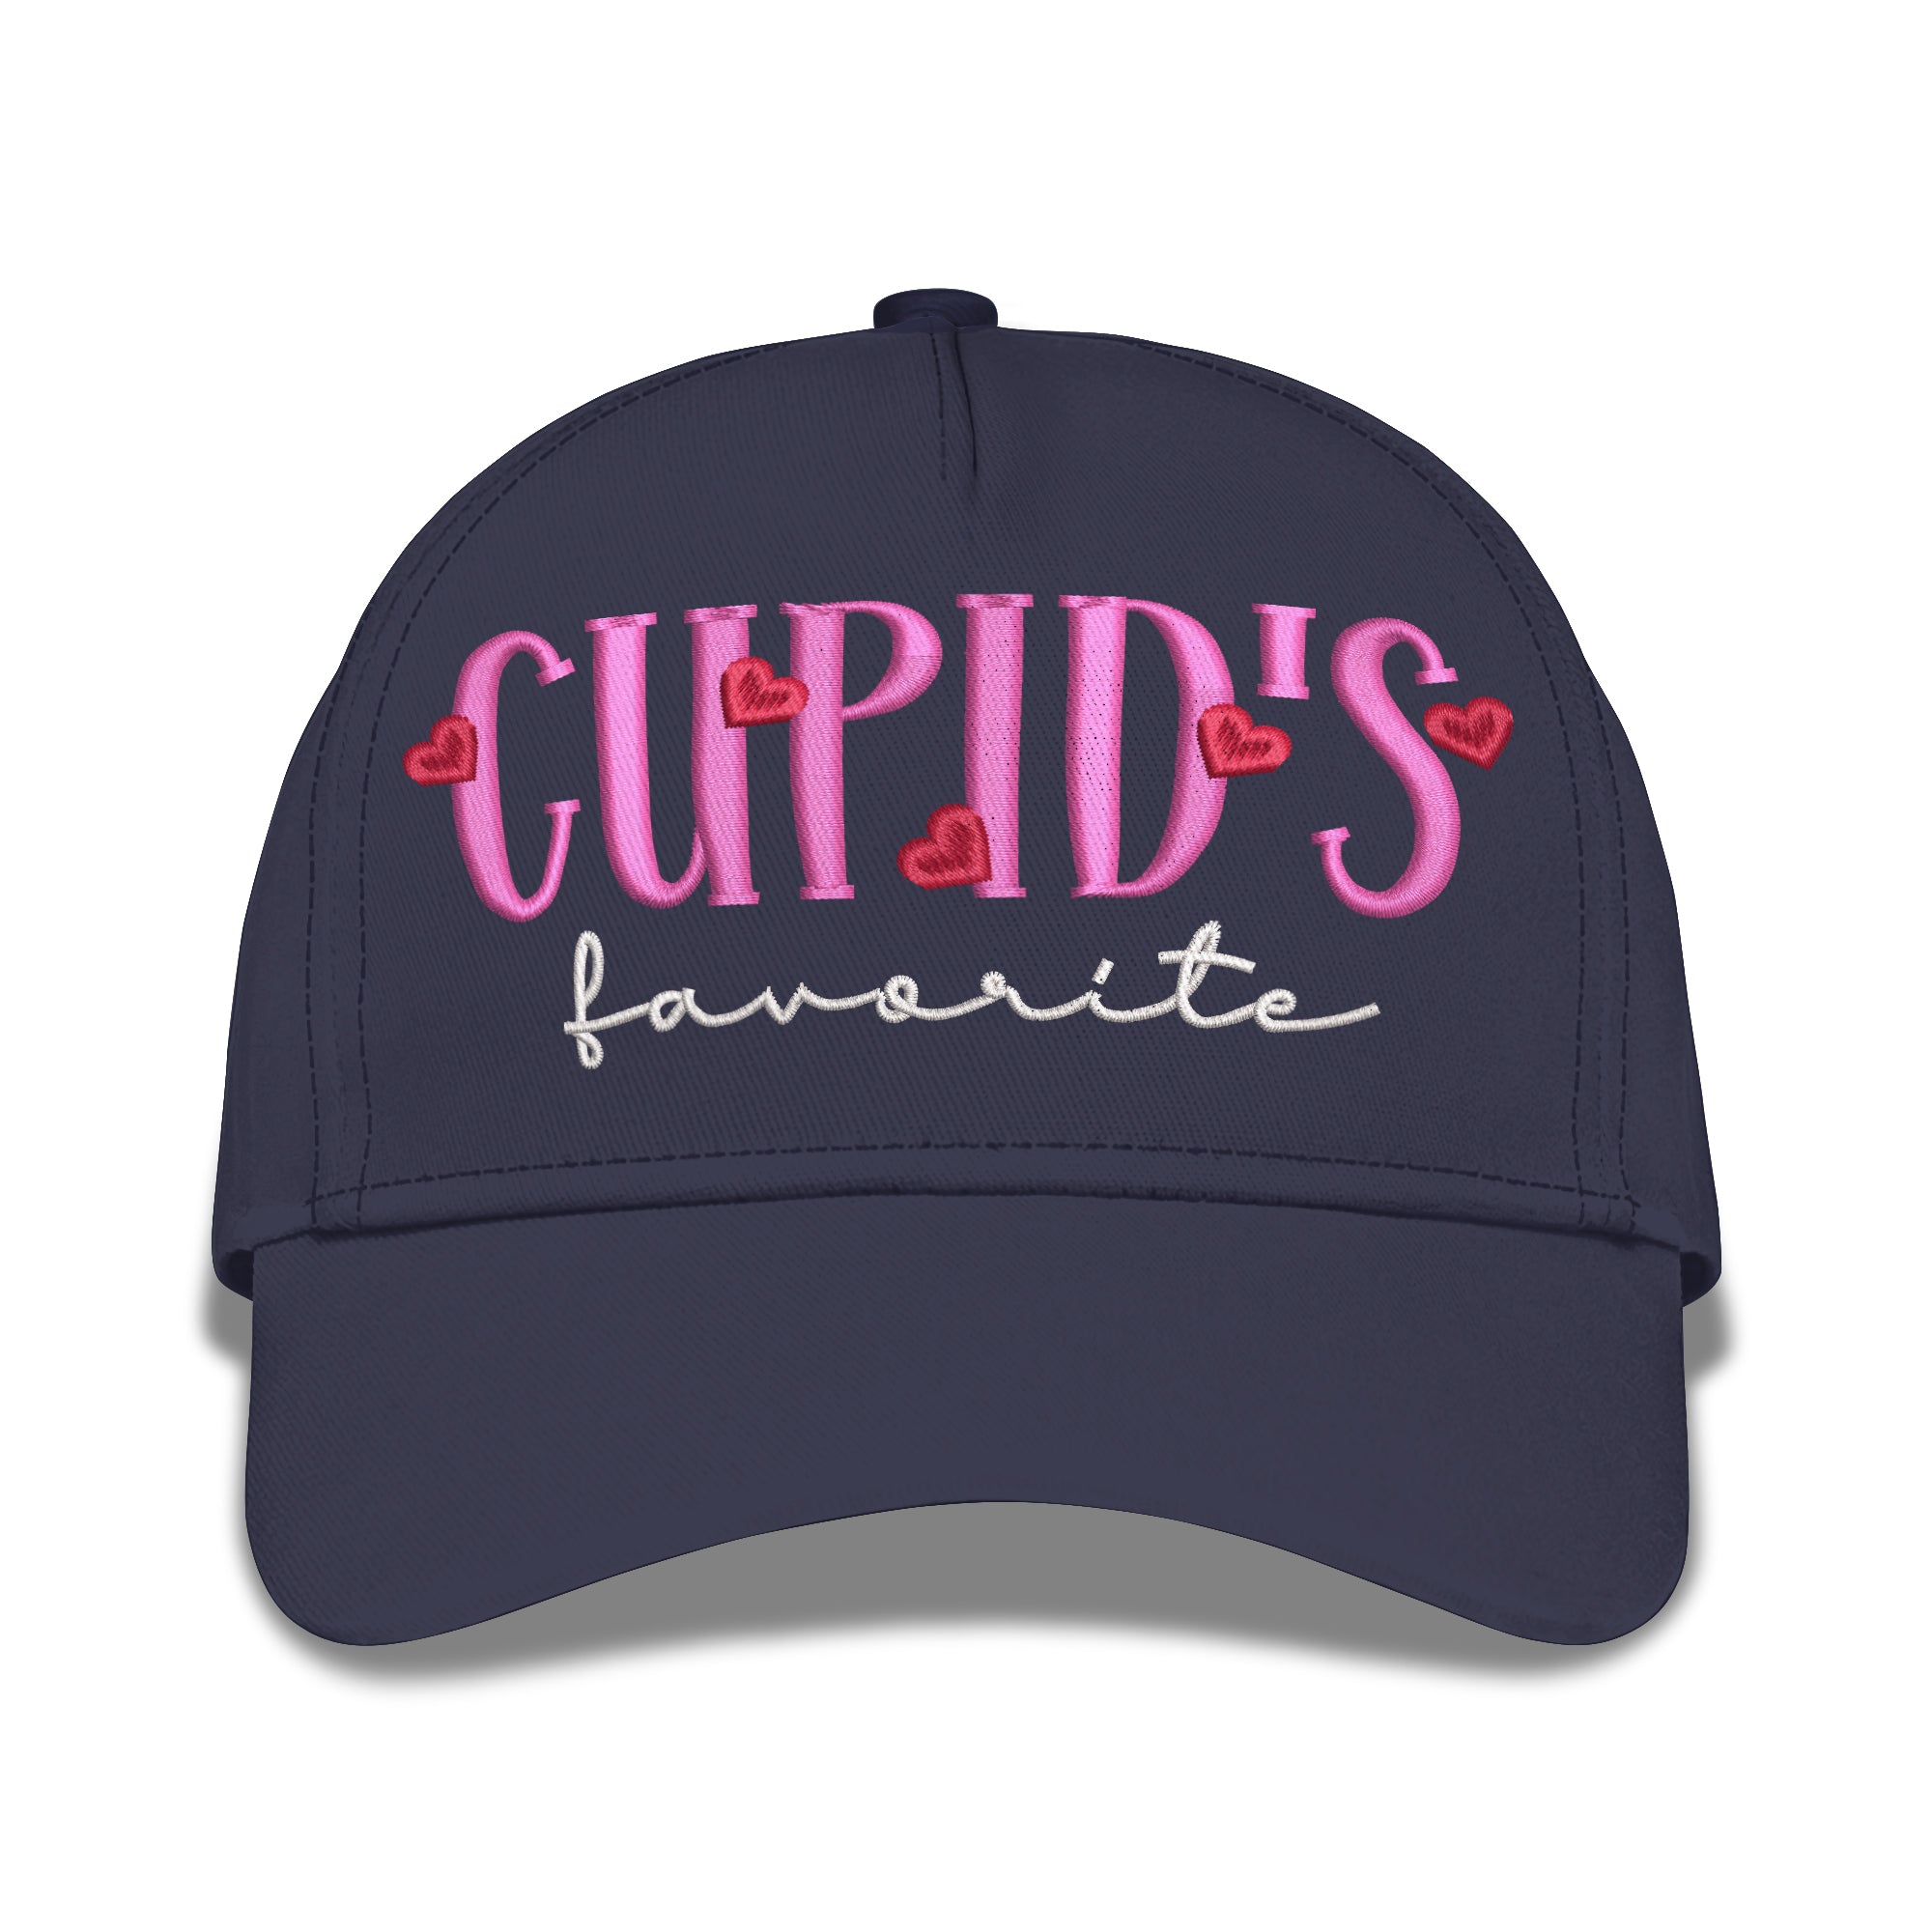 Cupid's Embroidered Baseball Caps